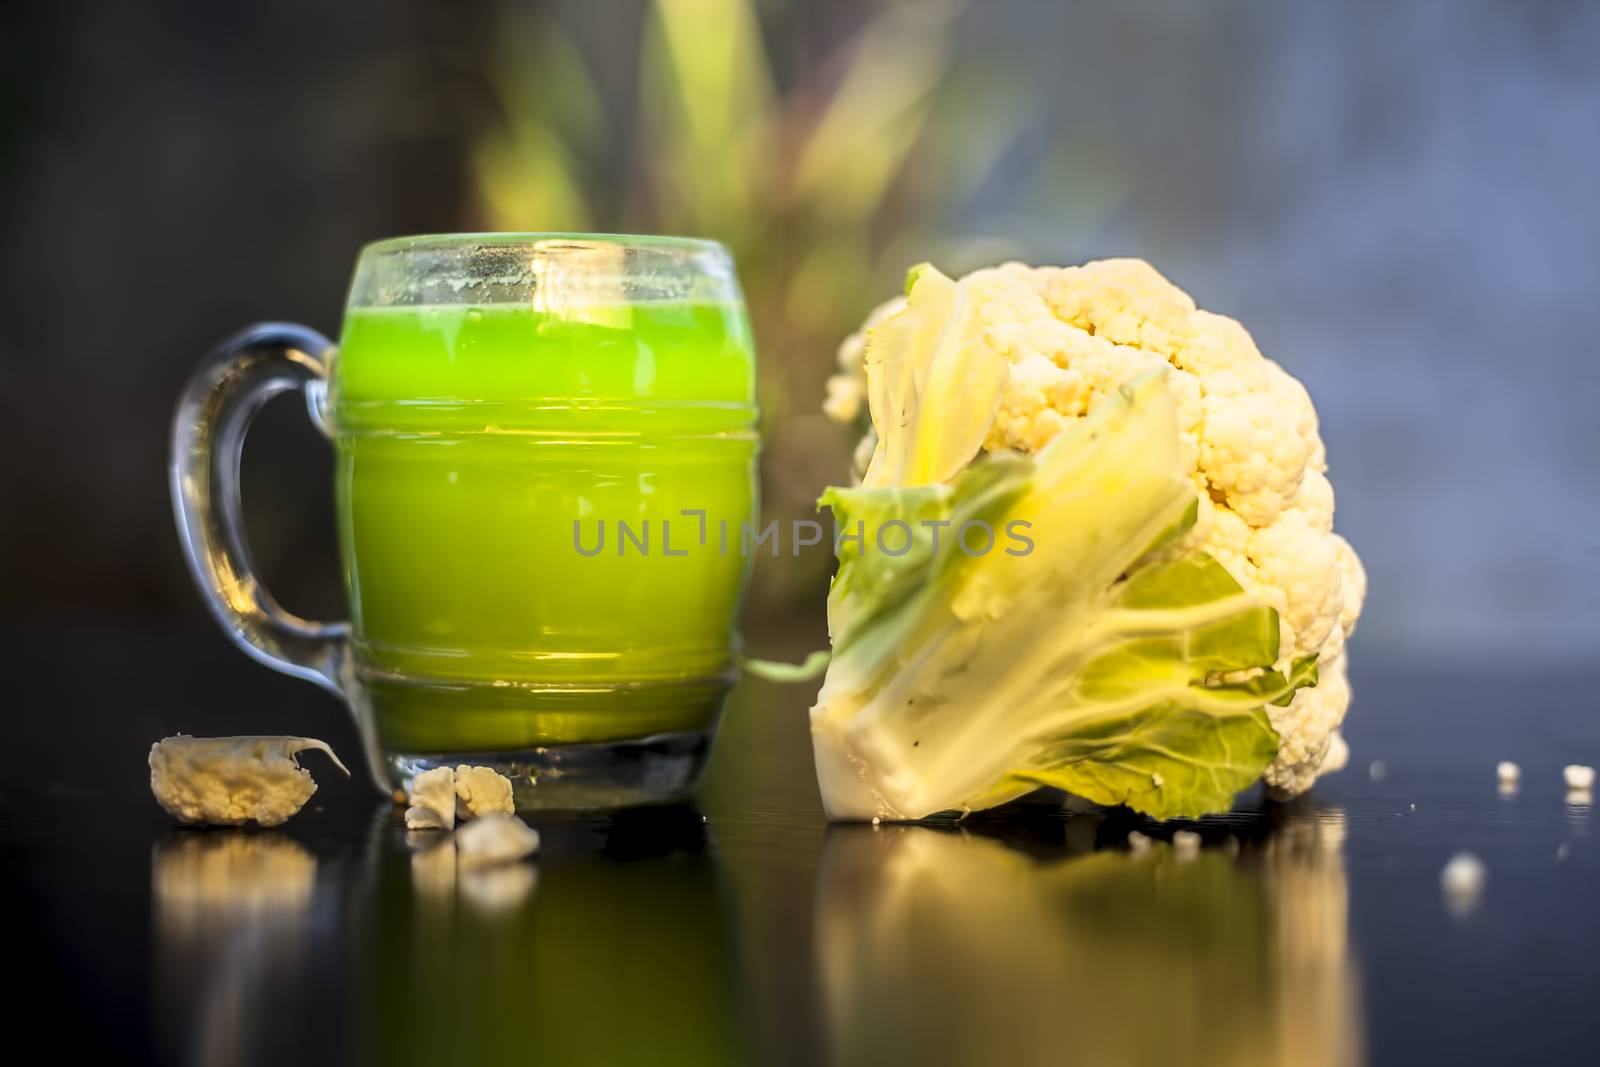 Close up shot of raw cauliflower and its healthy juice in a glass on a black surface with selective focus, creative lighting, and blurred background.